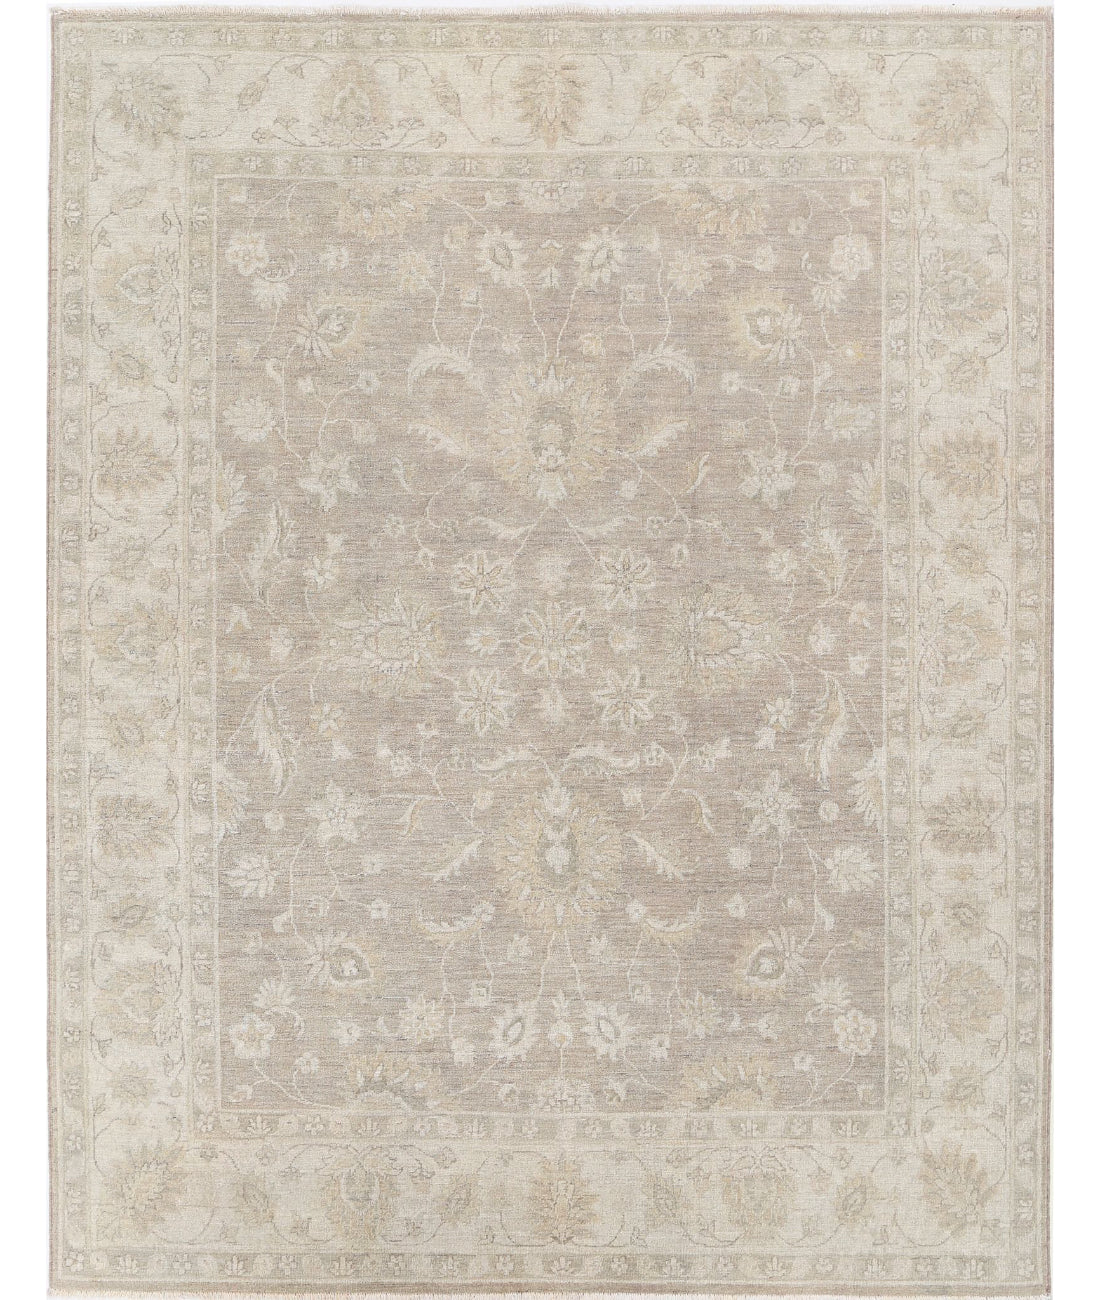 Hand Knotted Serenity Wool Rug - 6&#39;4&#39;&#39; x 8&#39;0&#39;&#39; 6&#39;4&#39;&#39; x 8&#39;0&#39;&#39; (190 X 240) / Taupe / Ivory